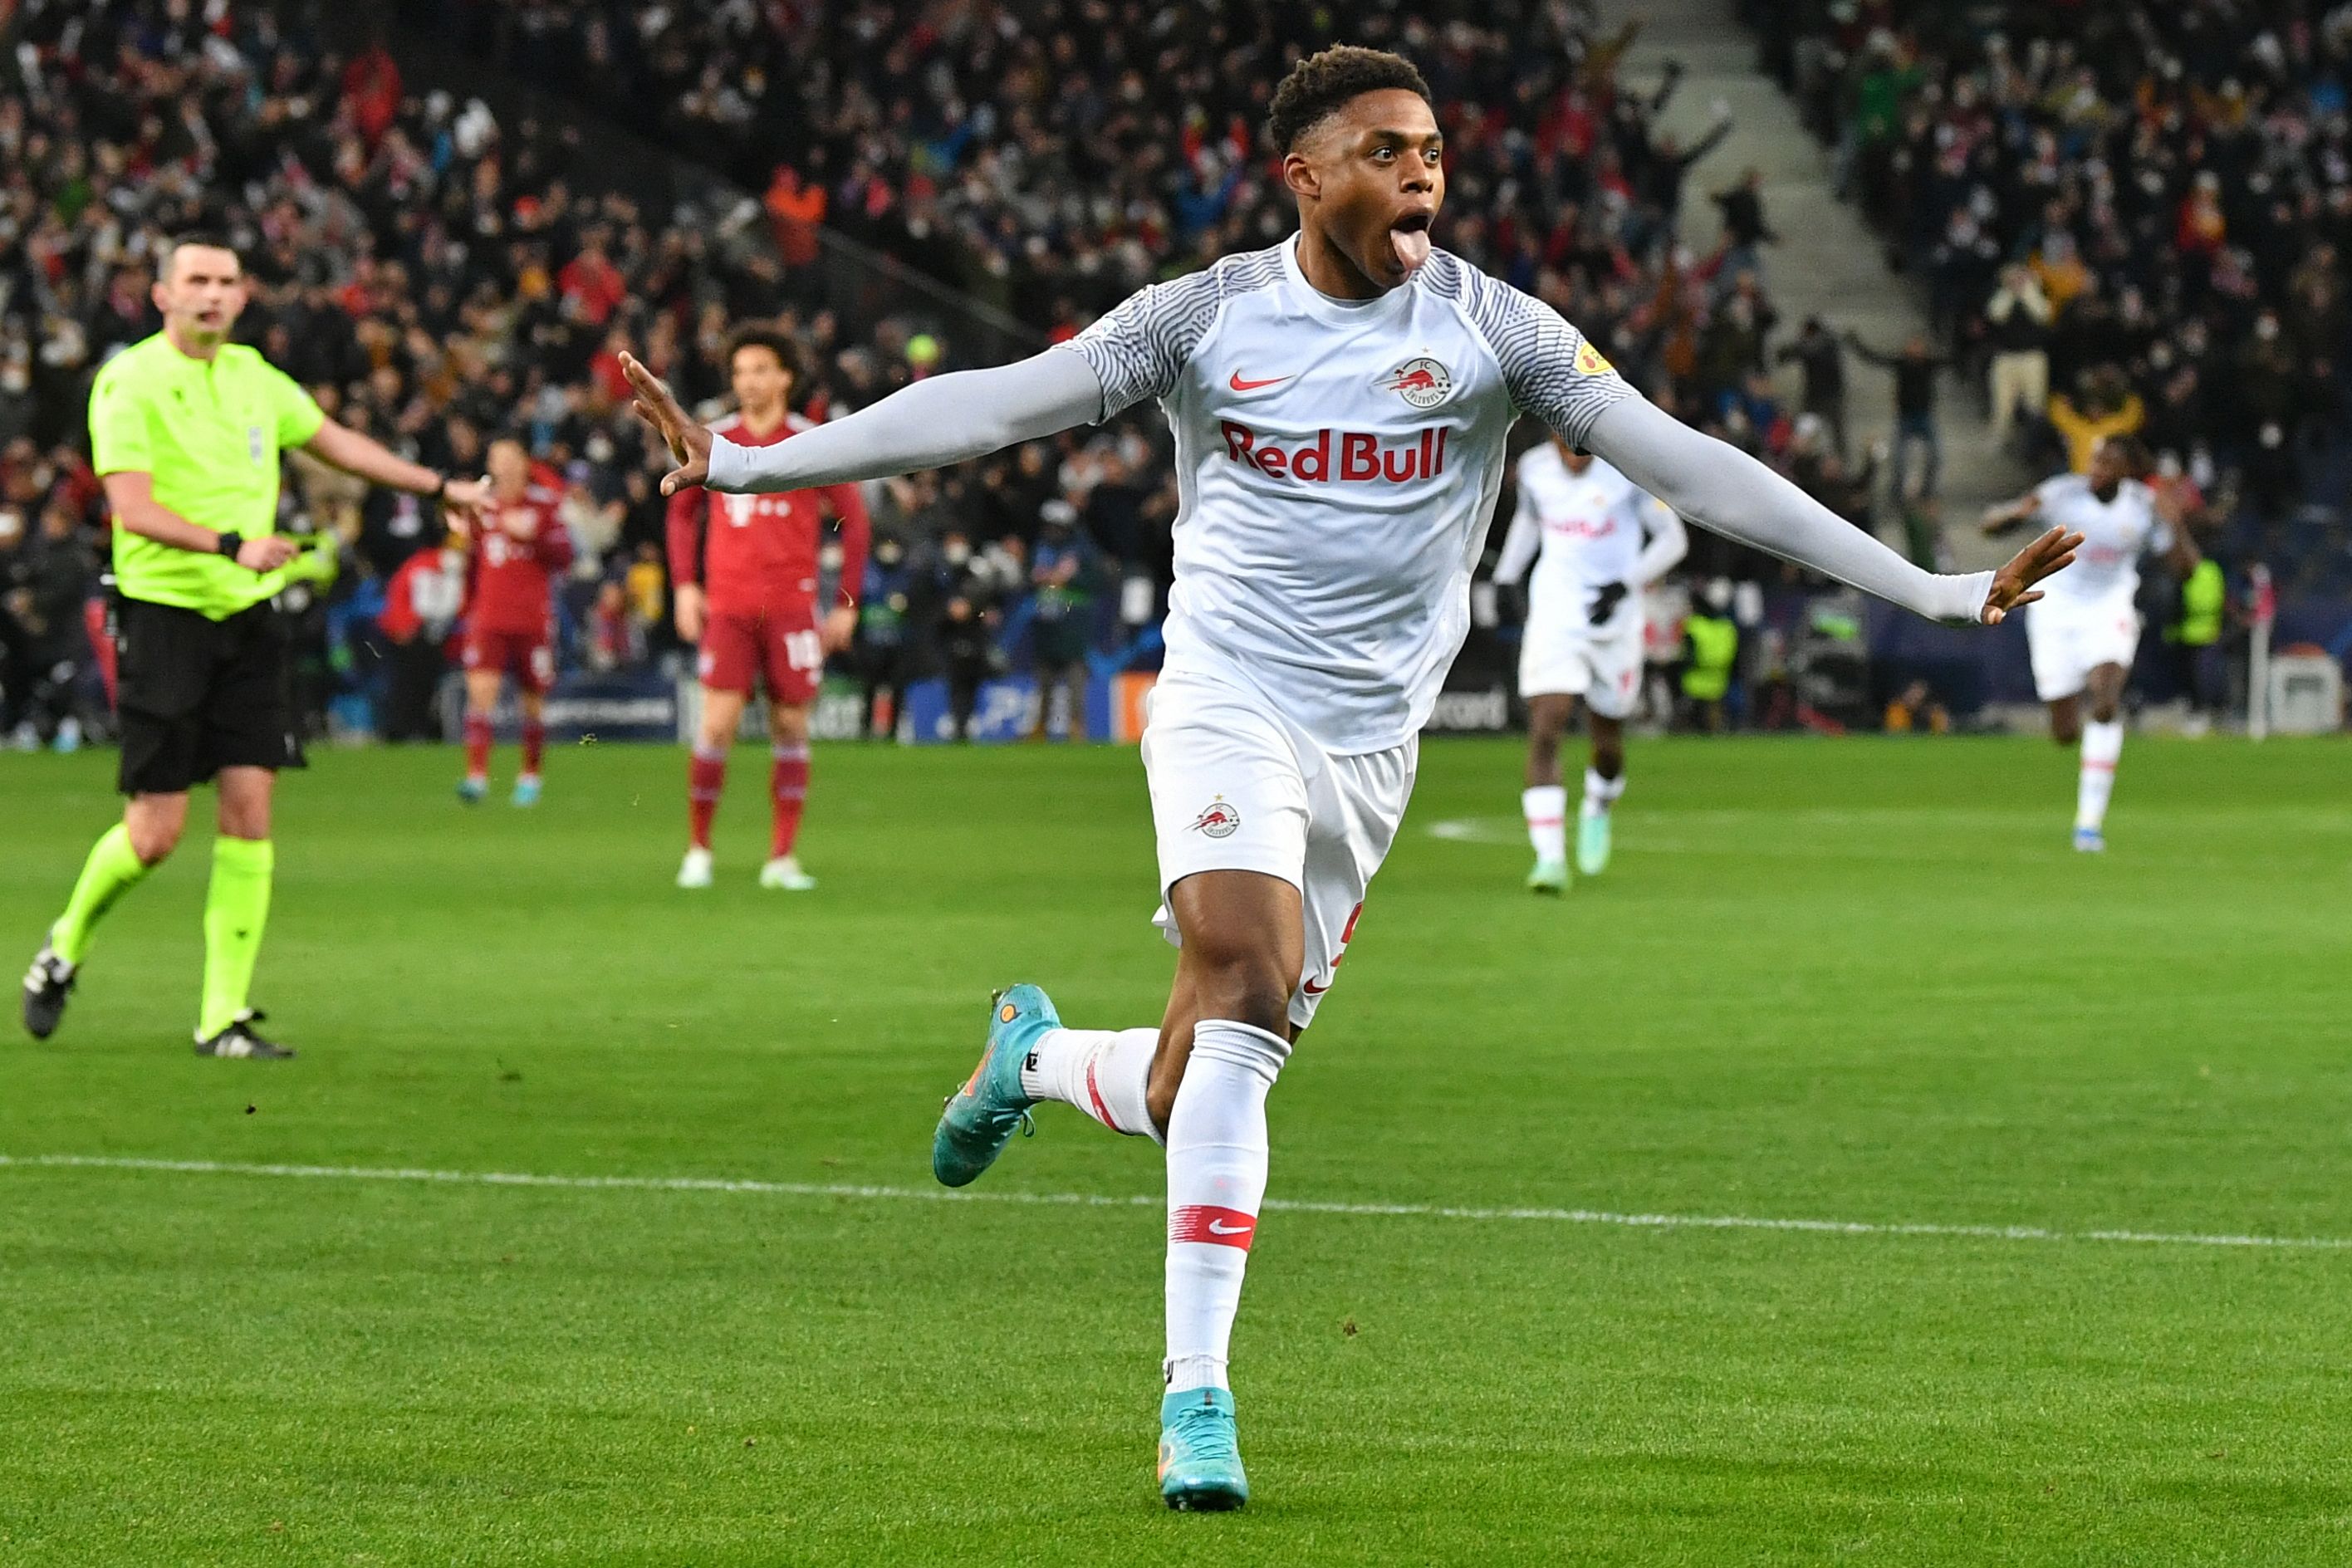 Salzburg 1-1 Bayern Munich Highlights: Kingsley Coman spares Bayern's blushes after scoring a 90th-minute equaliser against RB Salzburg in the 1st Leg of the Round of 16